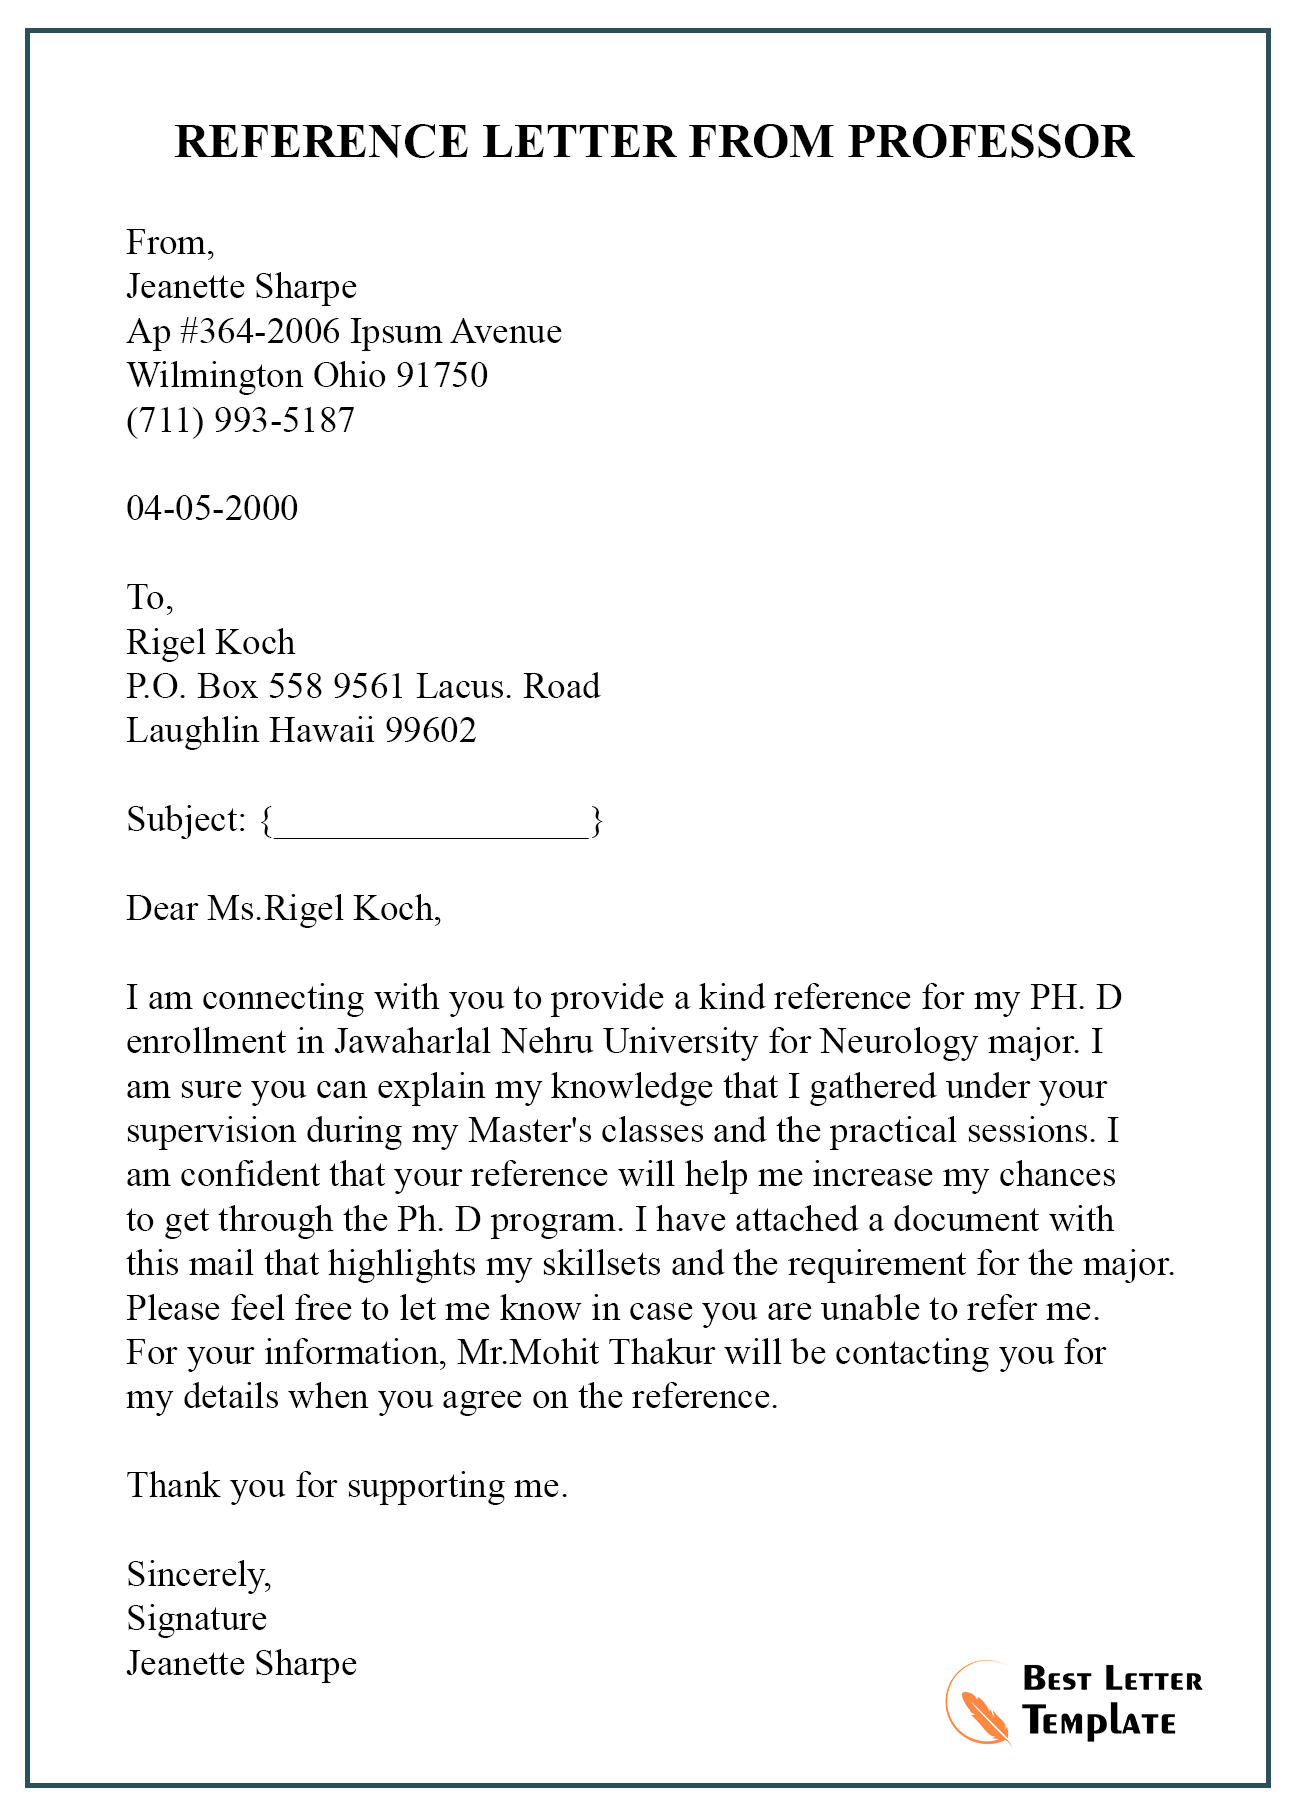 Request For Reference Letter From Professor Sample Best within size 1300 X 1806